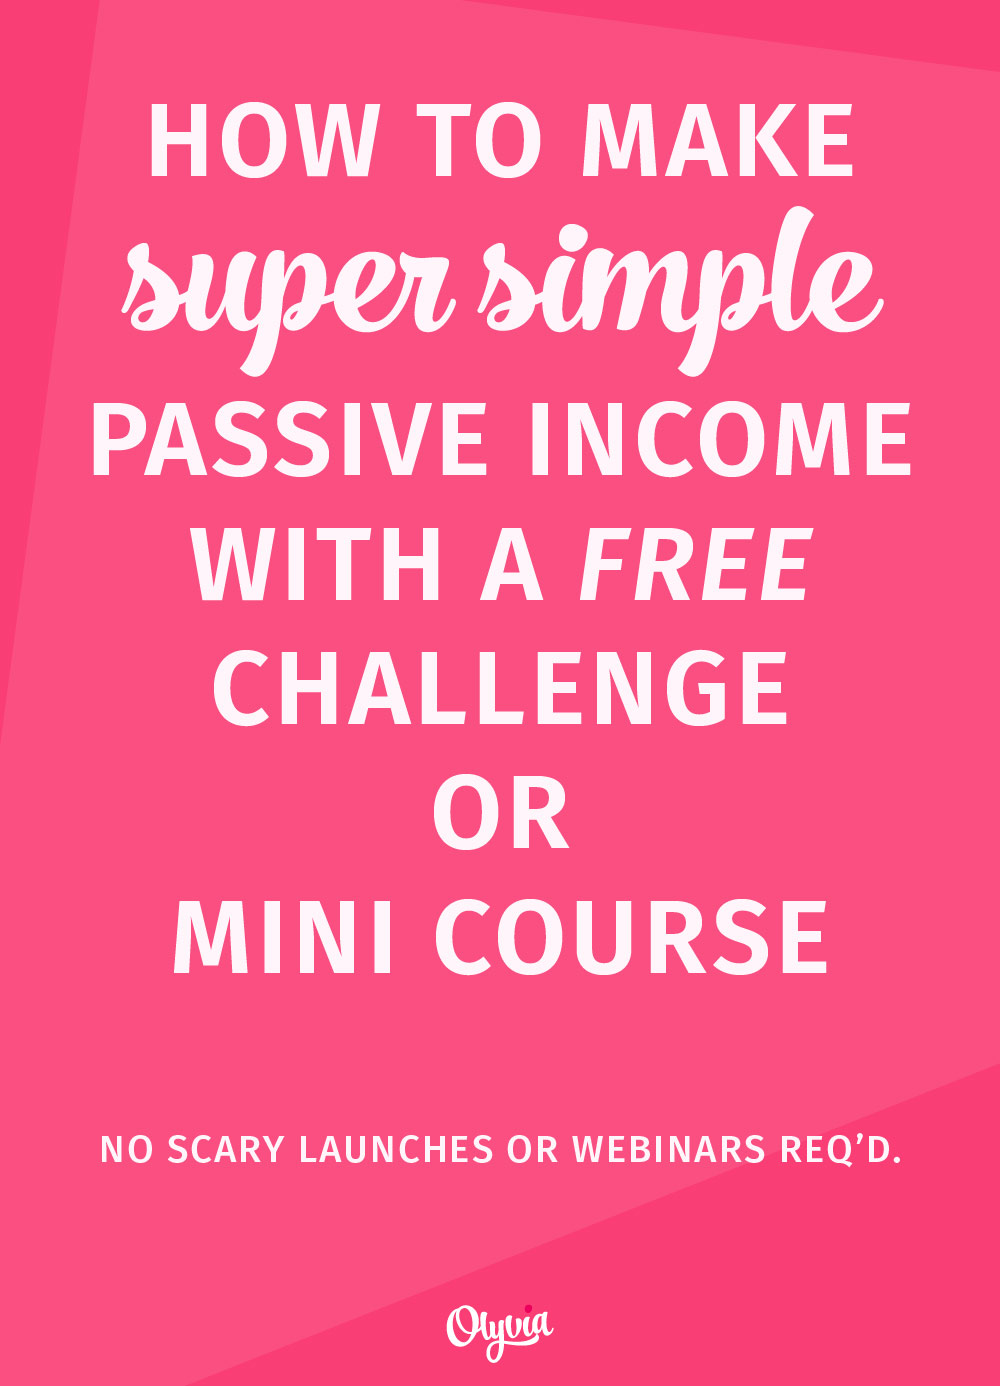 Want a simple, no-hassle way to make passive income for your blog or business...AND grow your email list? It's not as hard as you think, and you can do it without a scary launch or crazy webinars. (Perfect for introverts + beginners!) Click to read the full tutorial on Olyvia.co